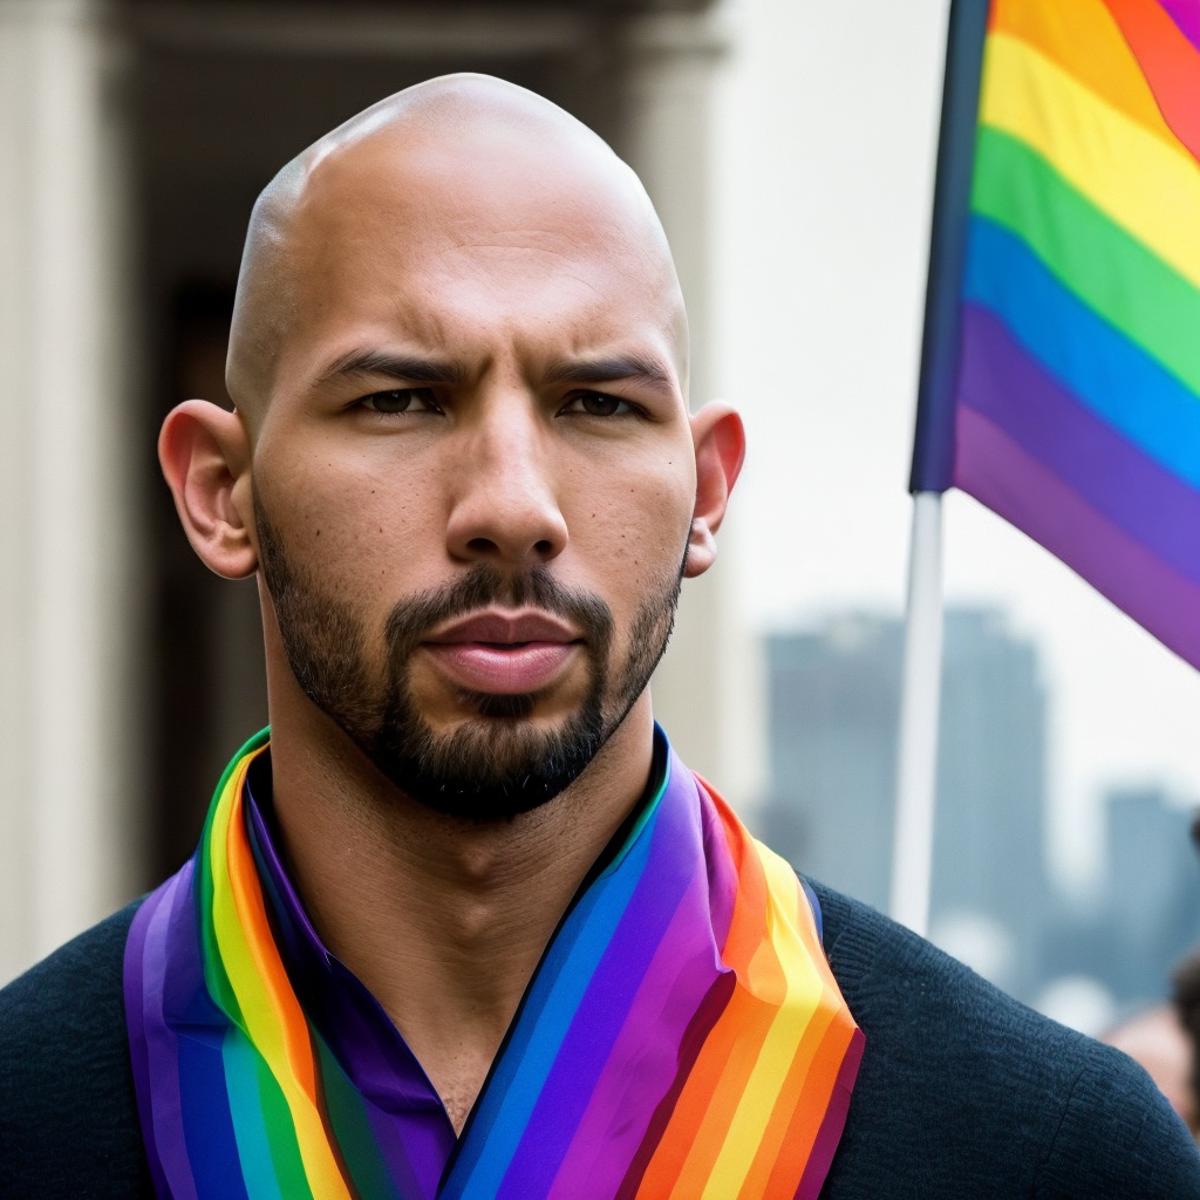 Bald man wearing a rainbow scarf and a black shirt with a flag in the background.